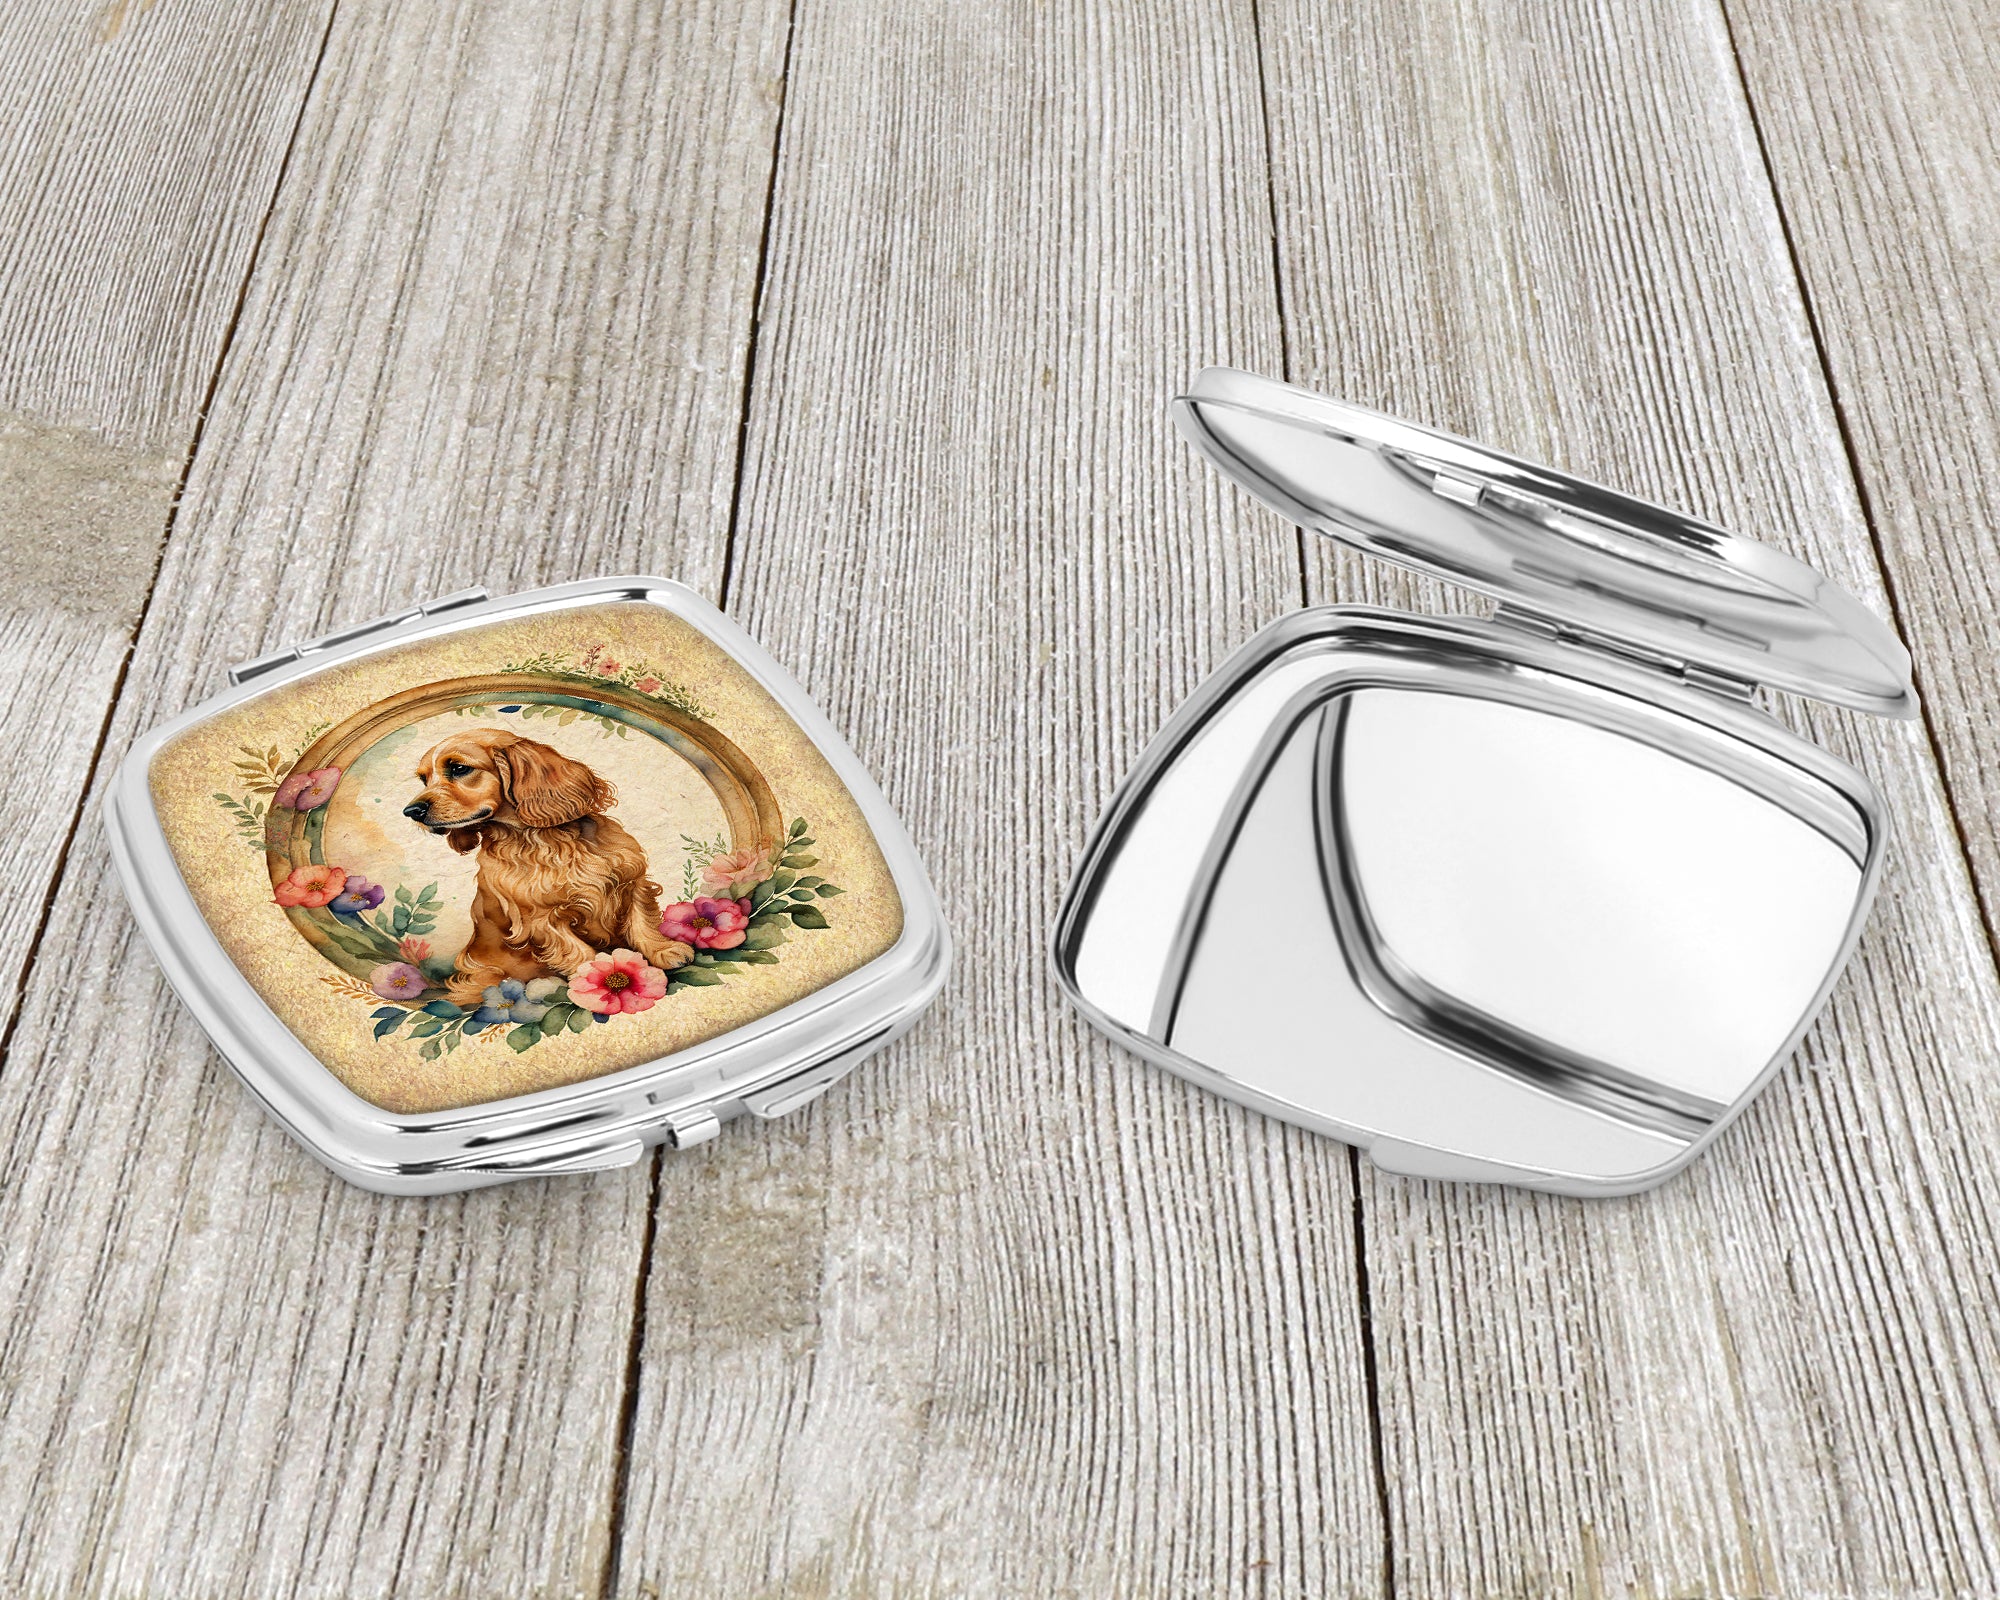 English Cocker Spaniel and Flowers Compact Mirror